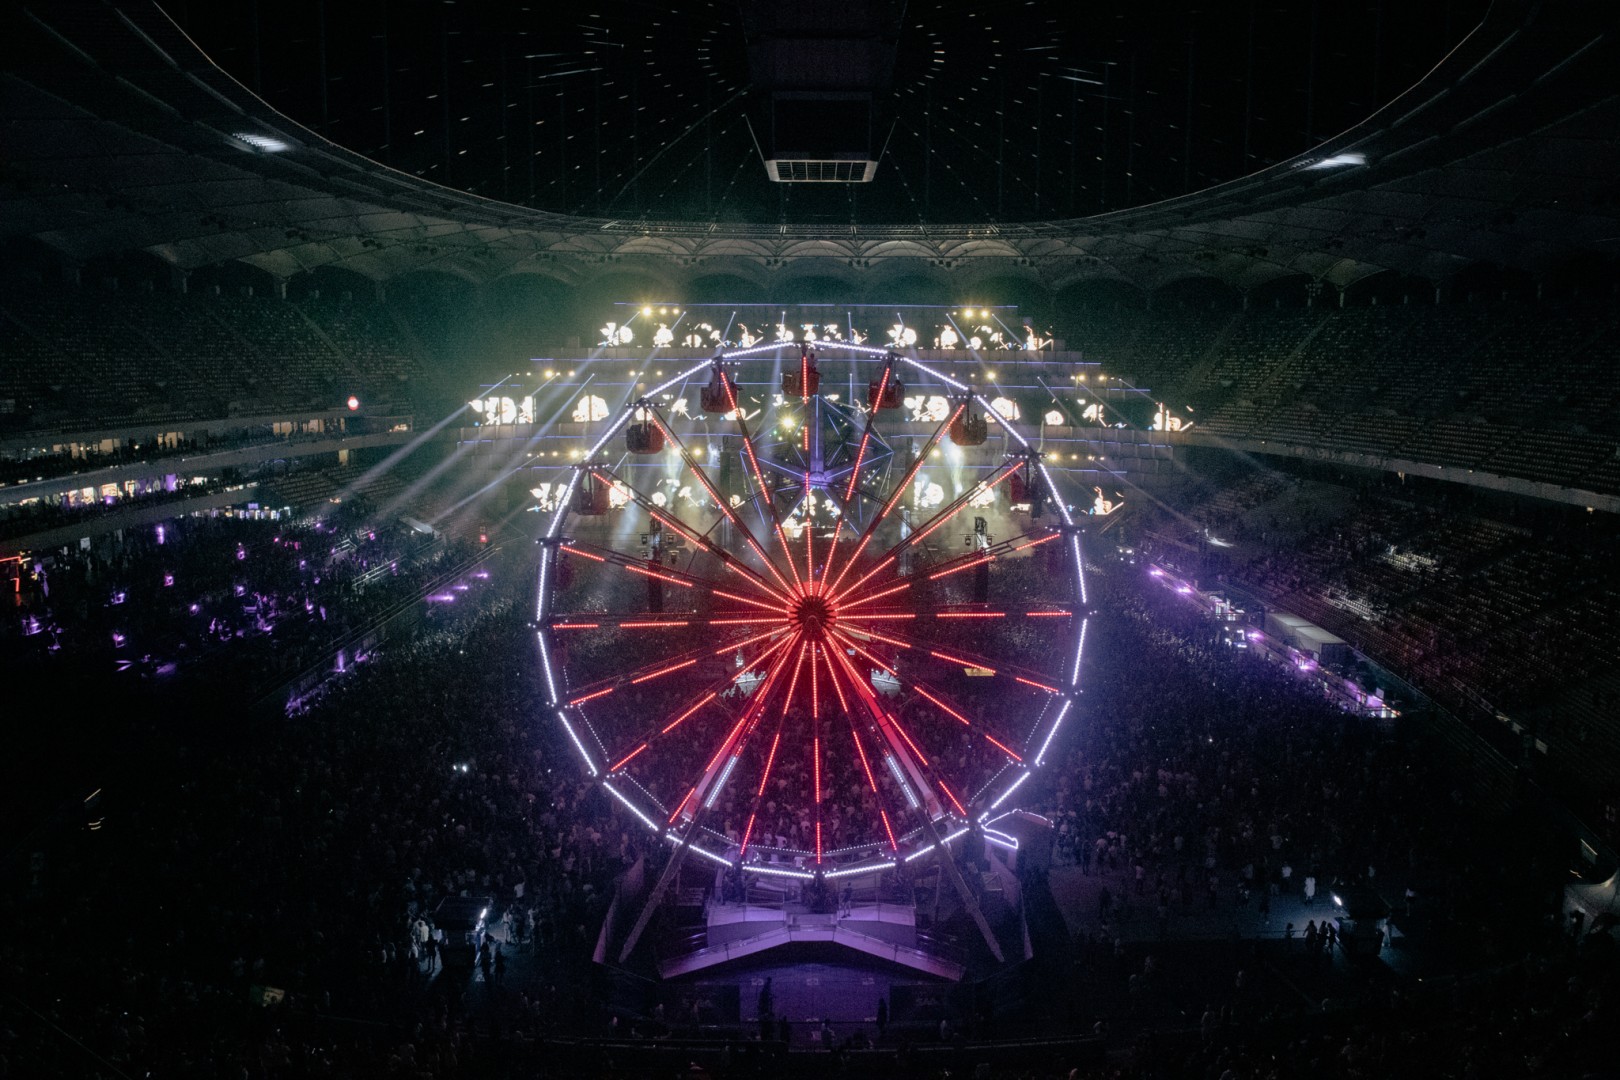 Ferris Wheel at National Arena in Bucharest on June 4, 2022 (d622035184)